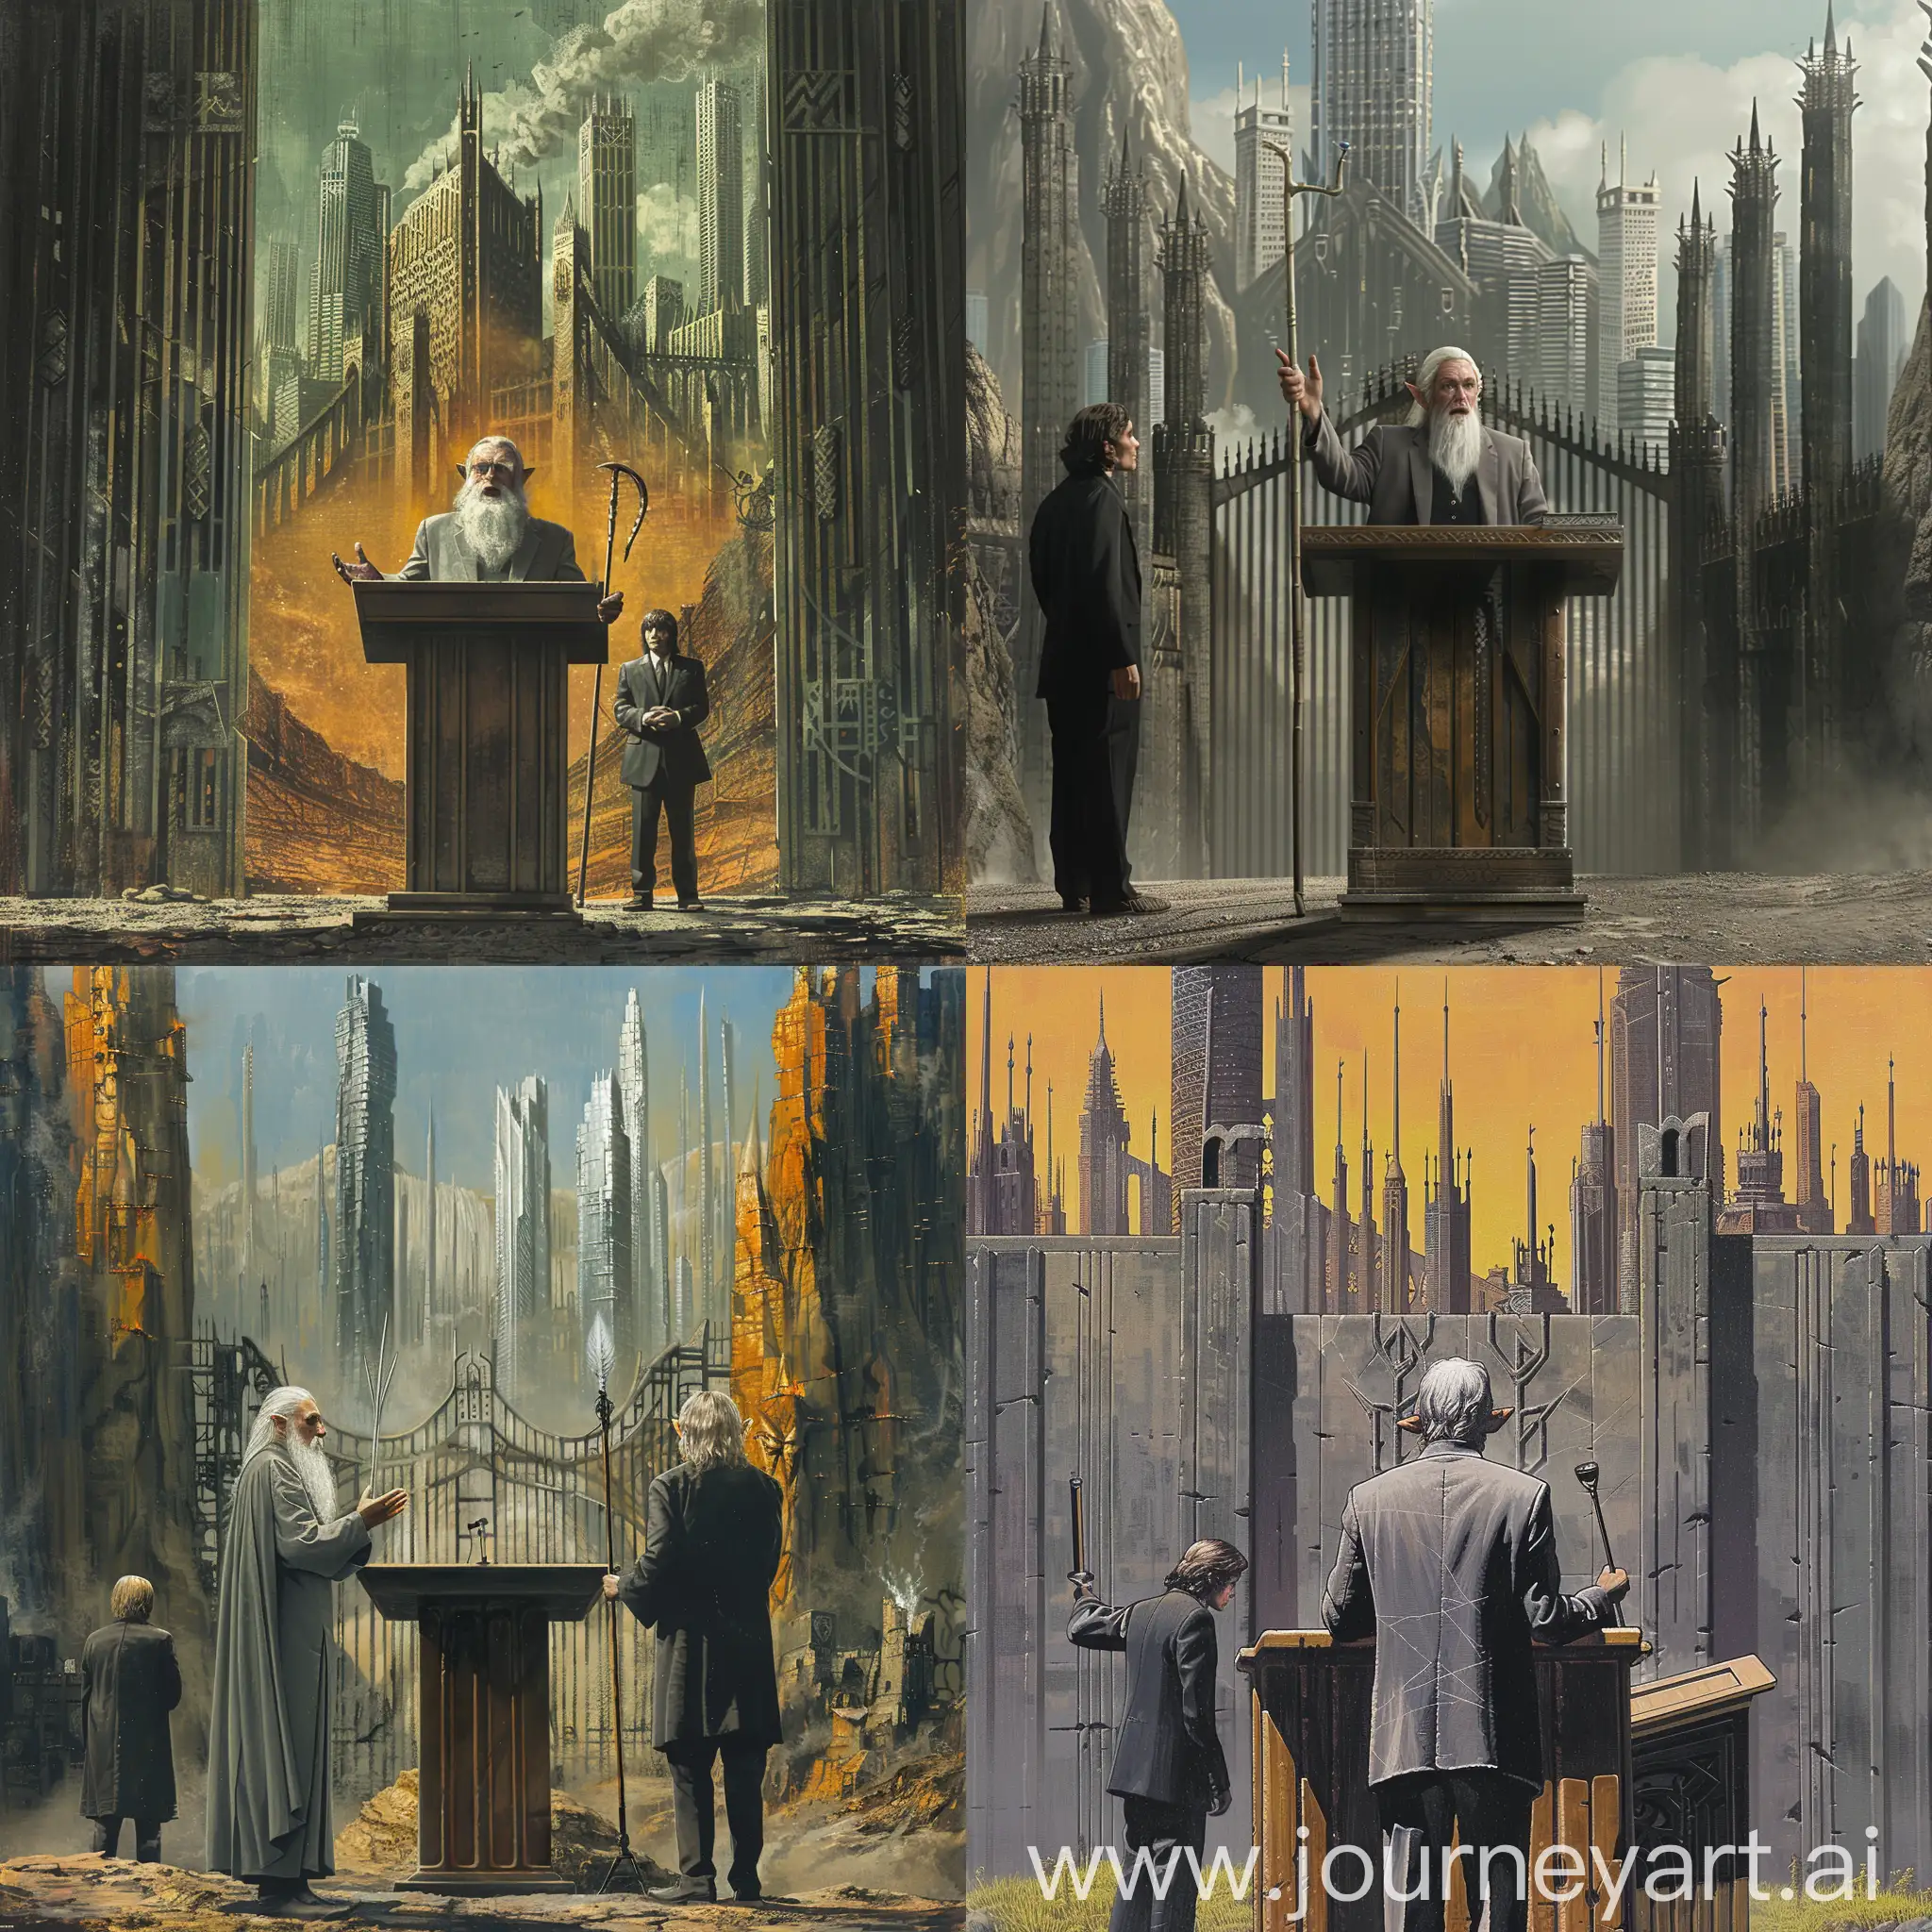 Gandalf-Giving-Speech-at-Mordor-Gates-with-Frodo-Holding-Staff